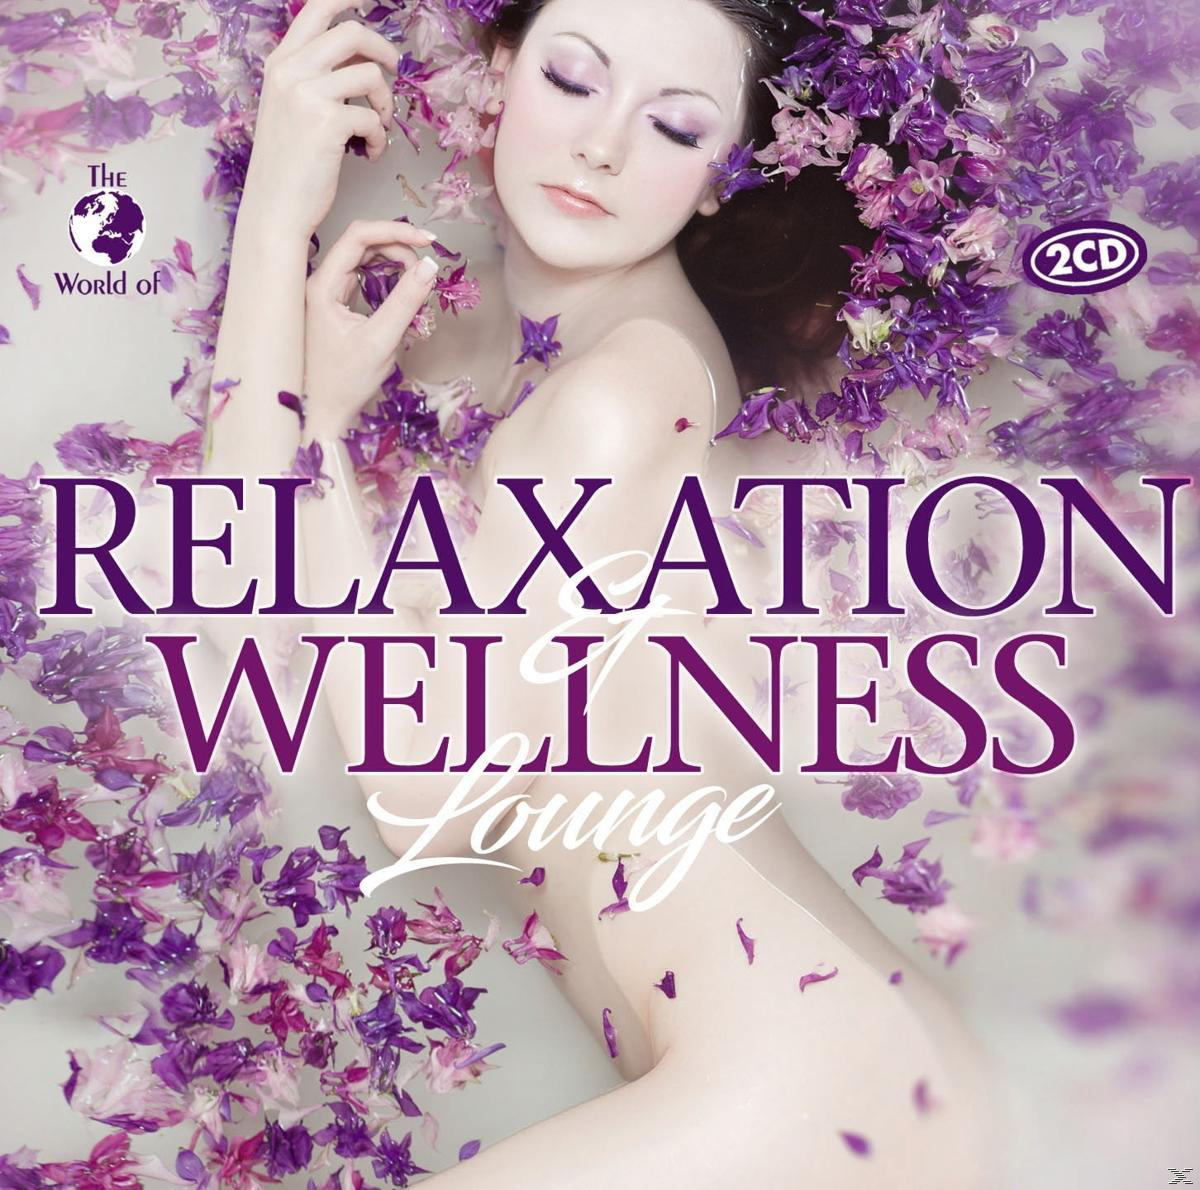 Relaxation (CD) Wellness VARIOUS - & Lounge -